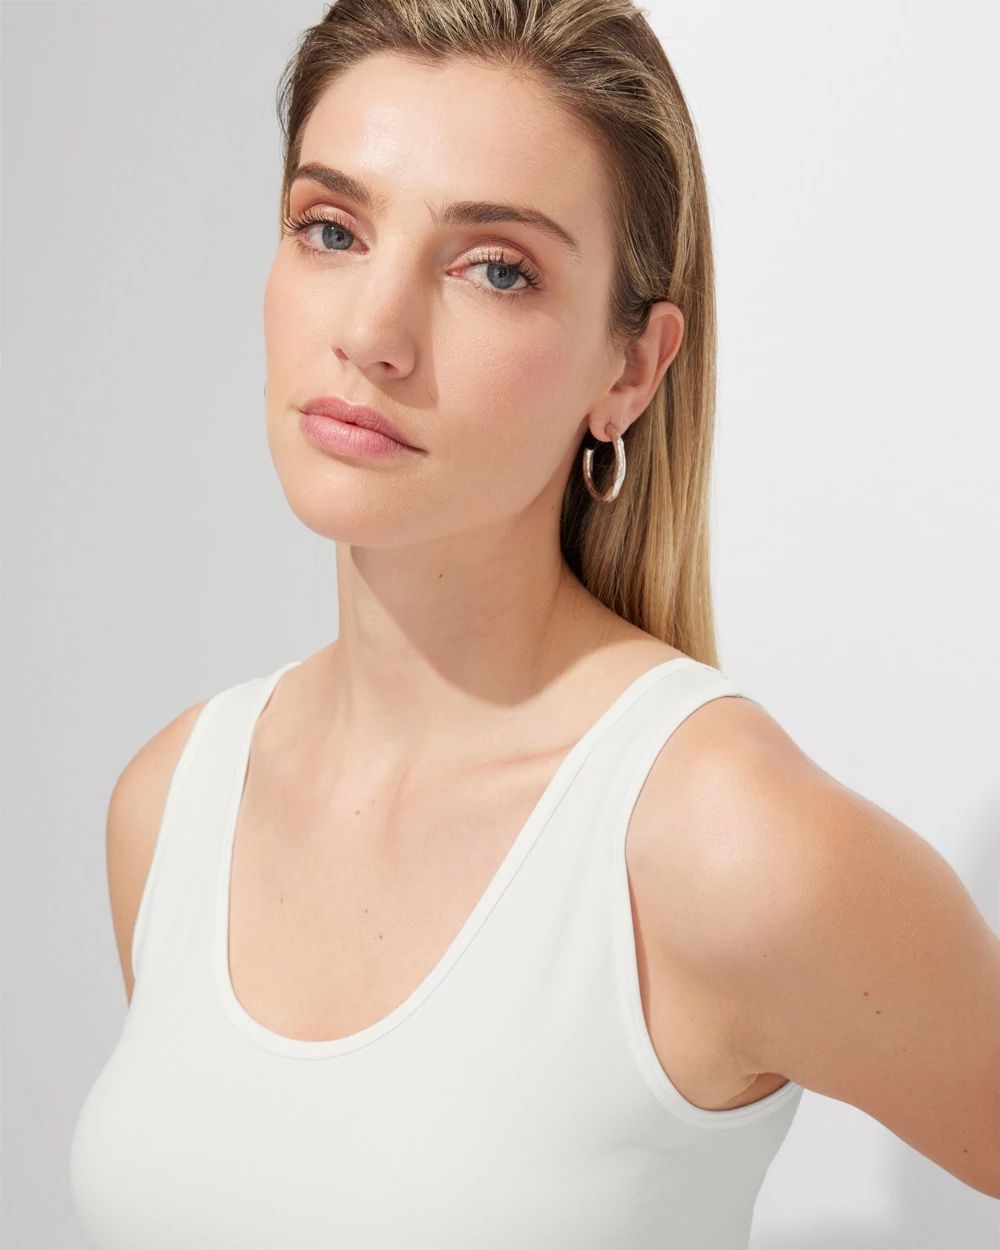 Outlet WHBM Convertible Neckline Tank